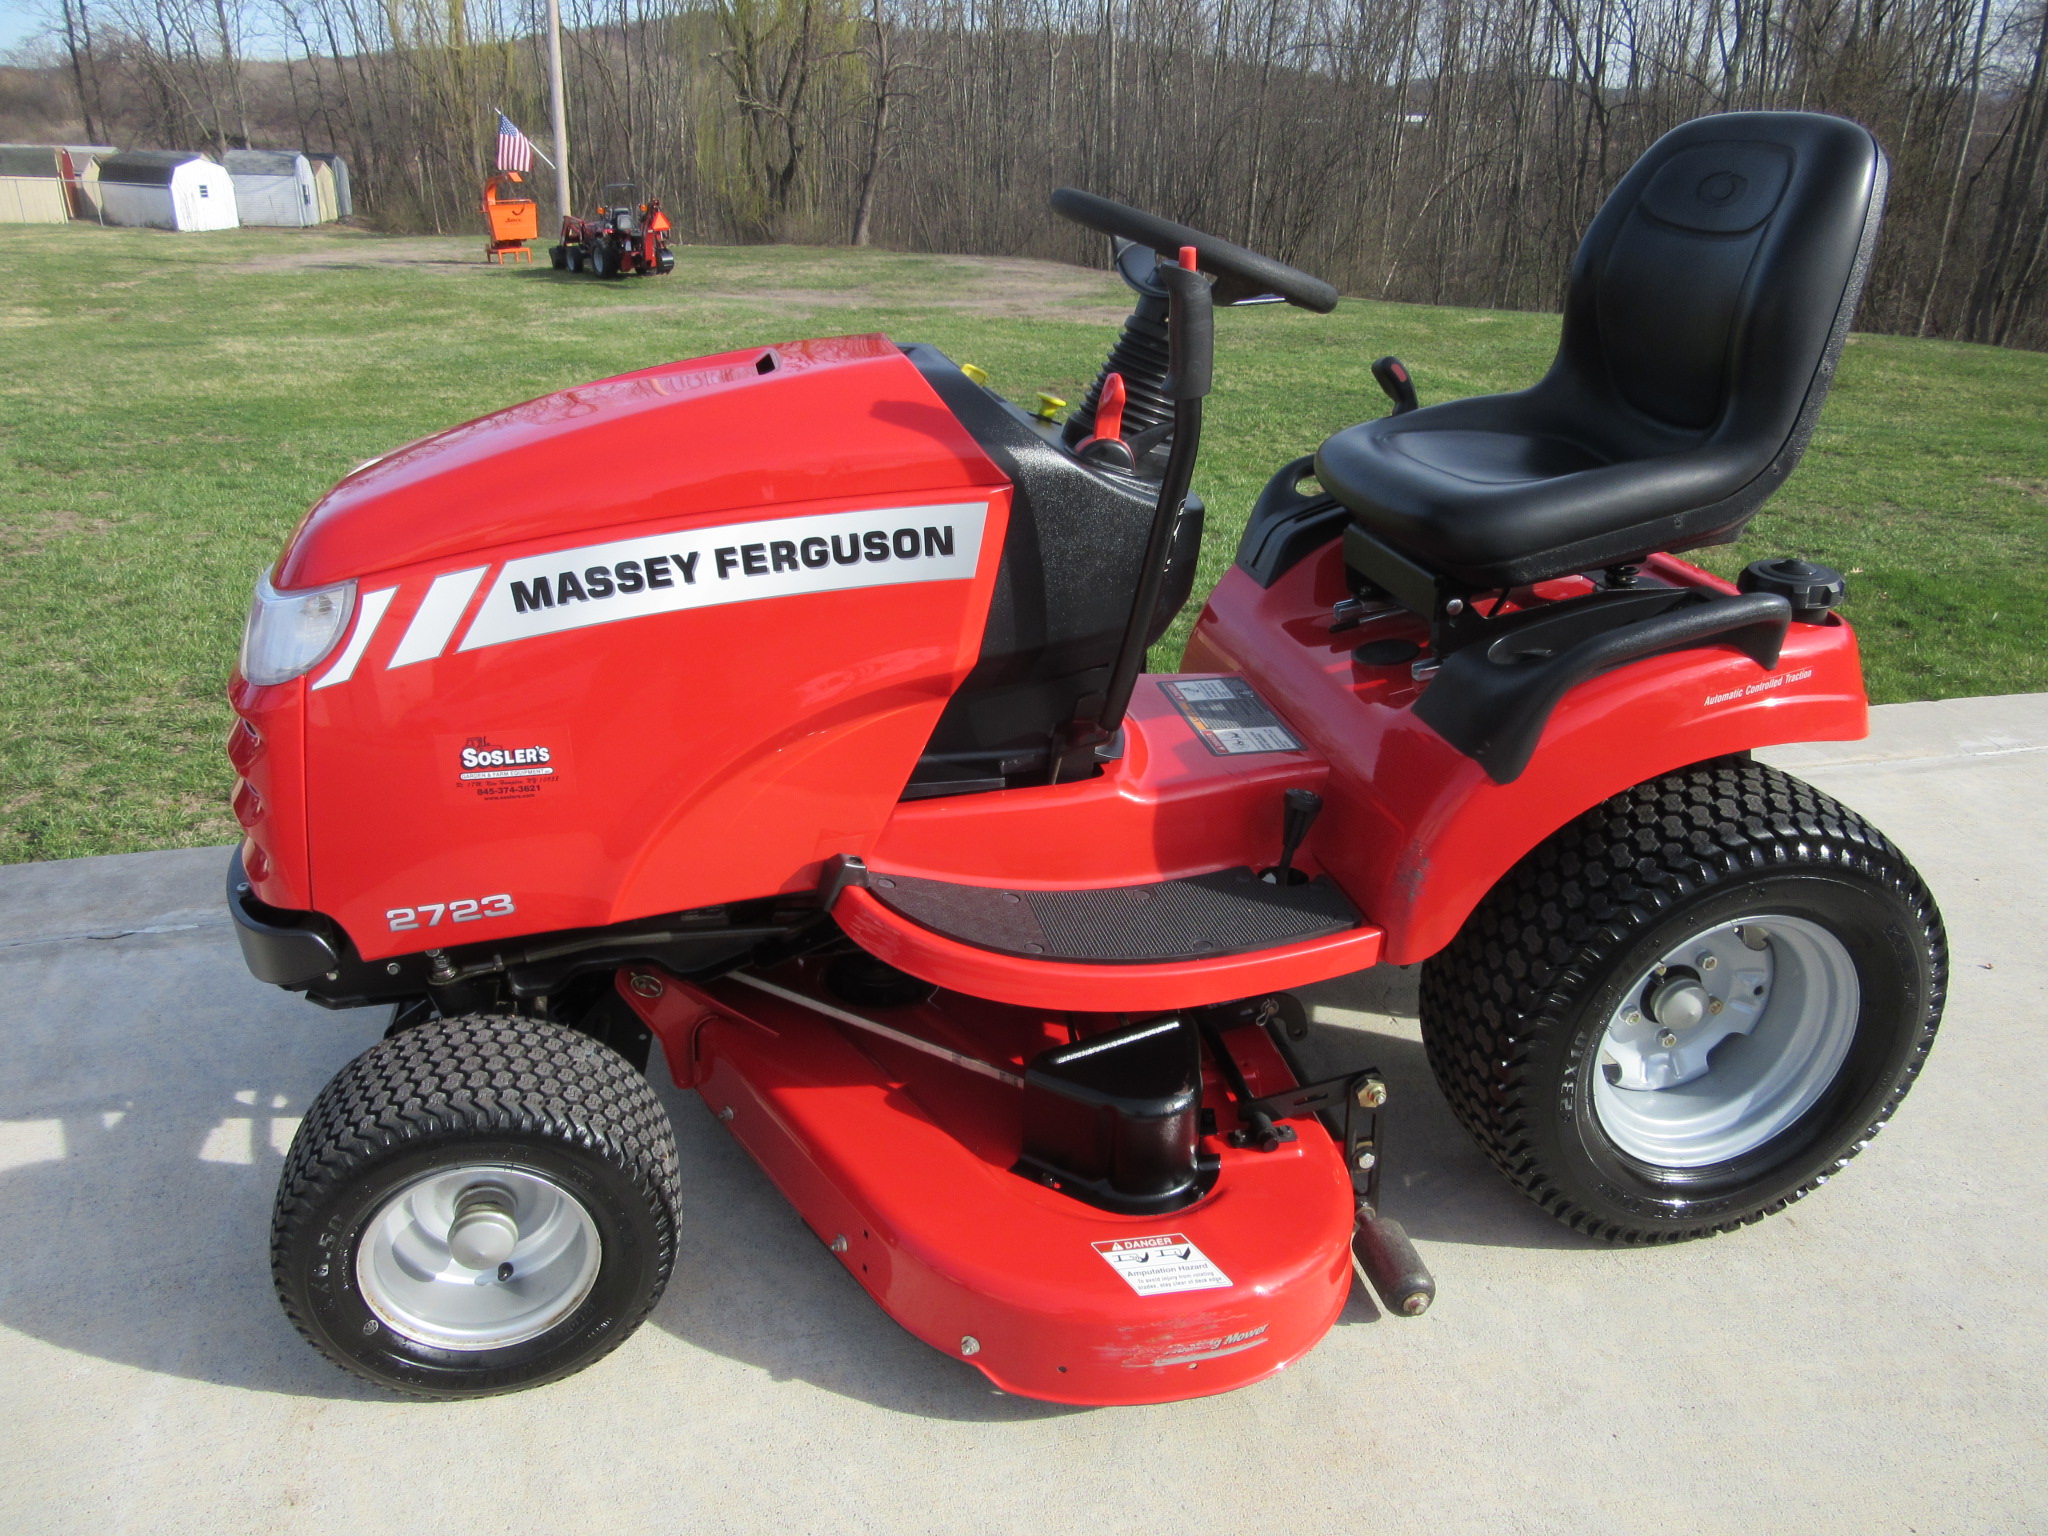 2010 Massey Ferguson Mf2723h Lawn Tractor For Sale In New Hampton Ny Ironsearch